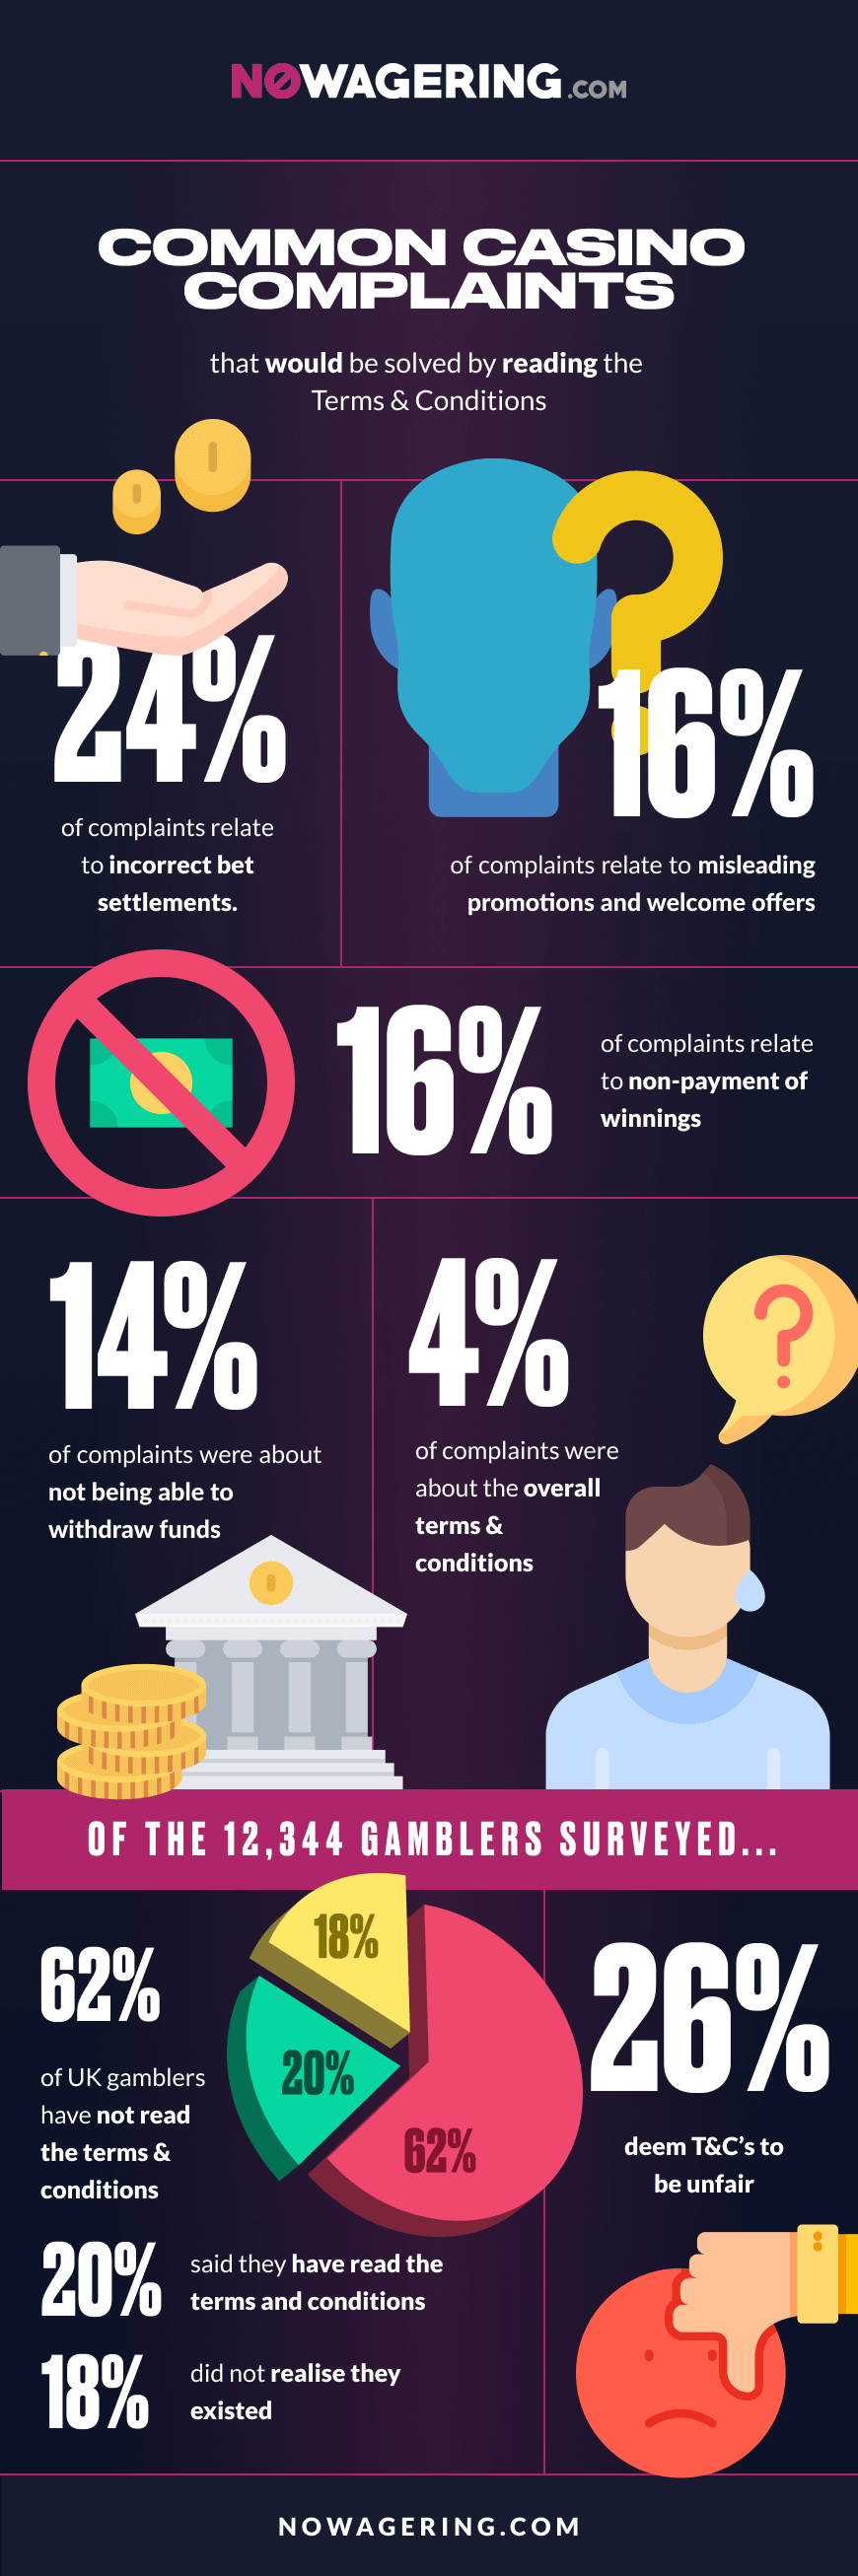 Nowagering.com Infographic based on common casino complaints